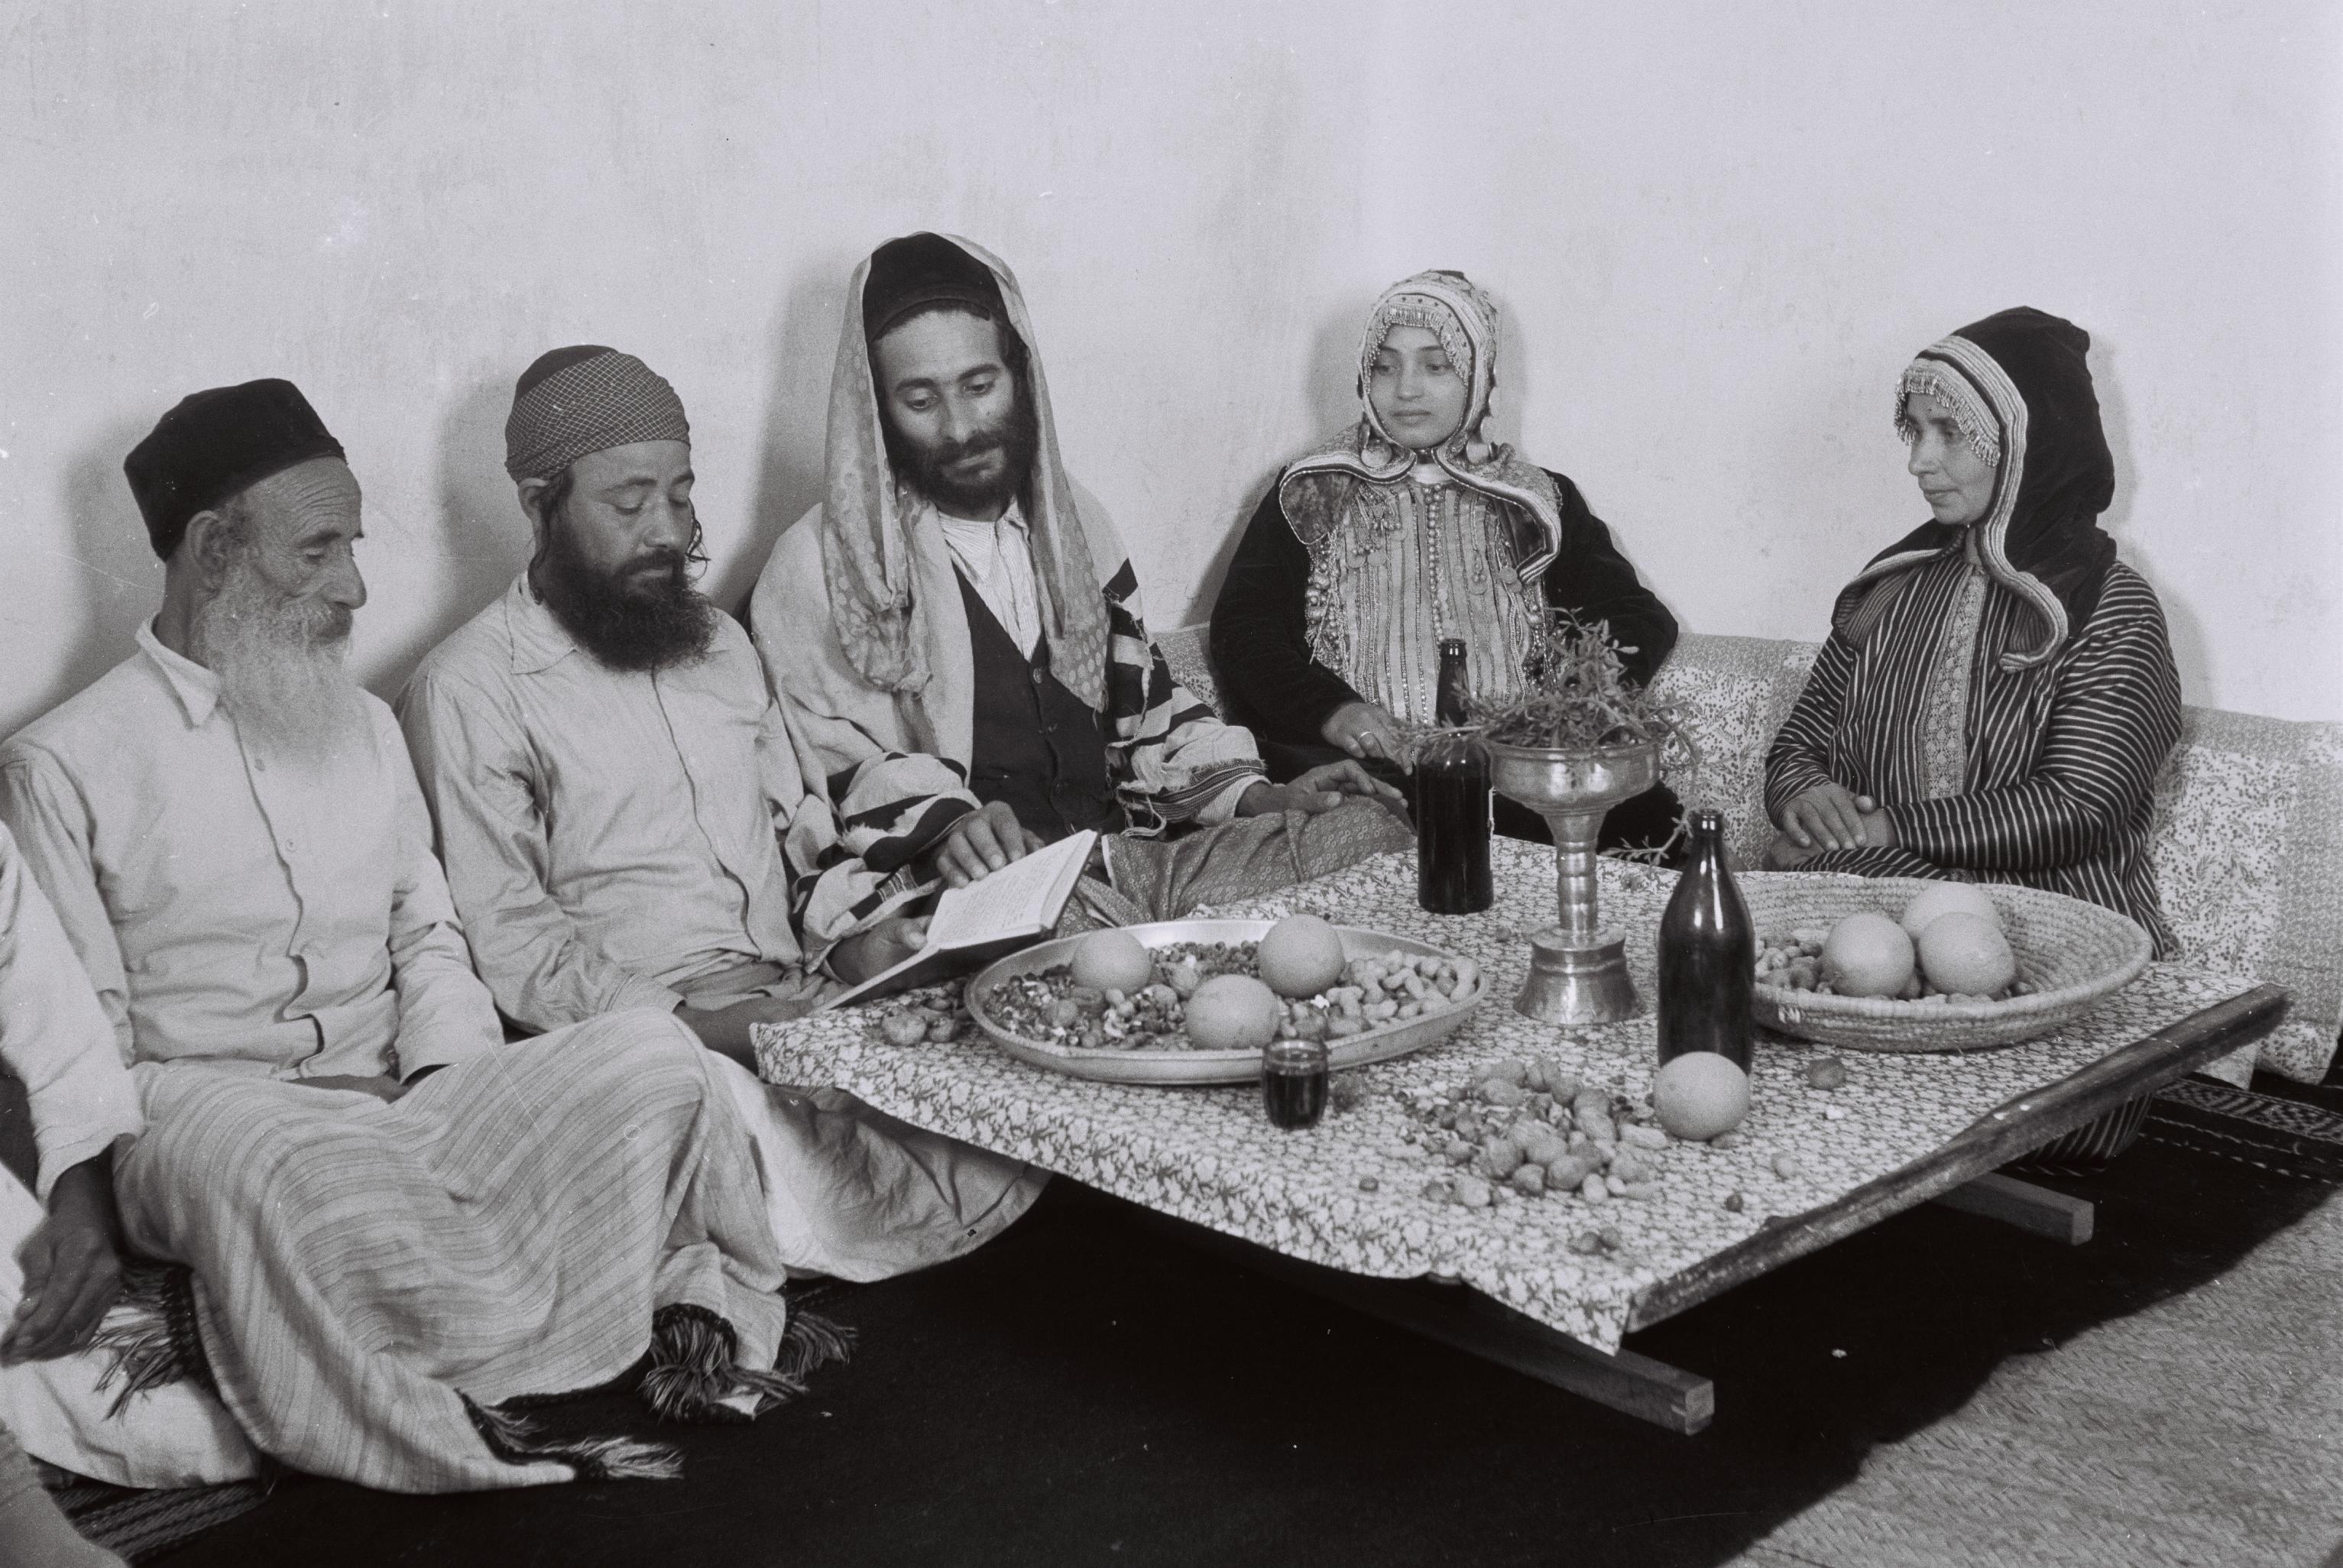 A Jewish family in Yemen gathered around the table reading Psalms. (c) Christian-Julien Robin, President of the Academy of Inscriptions and Belles-lettres (France)